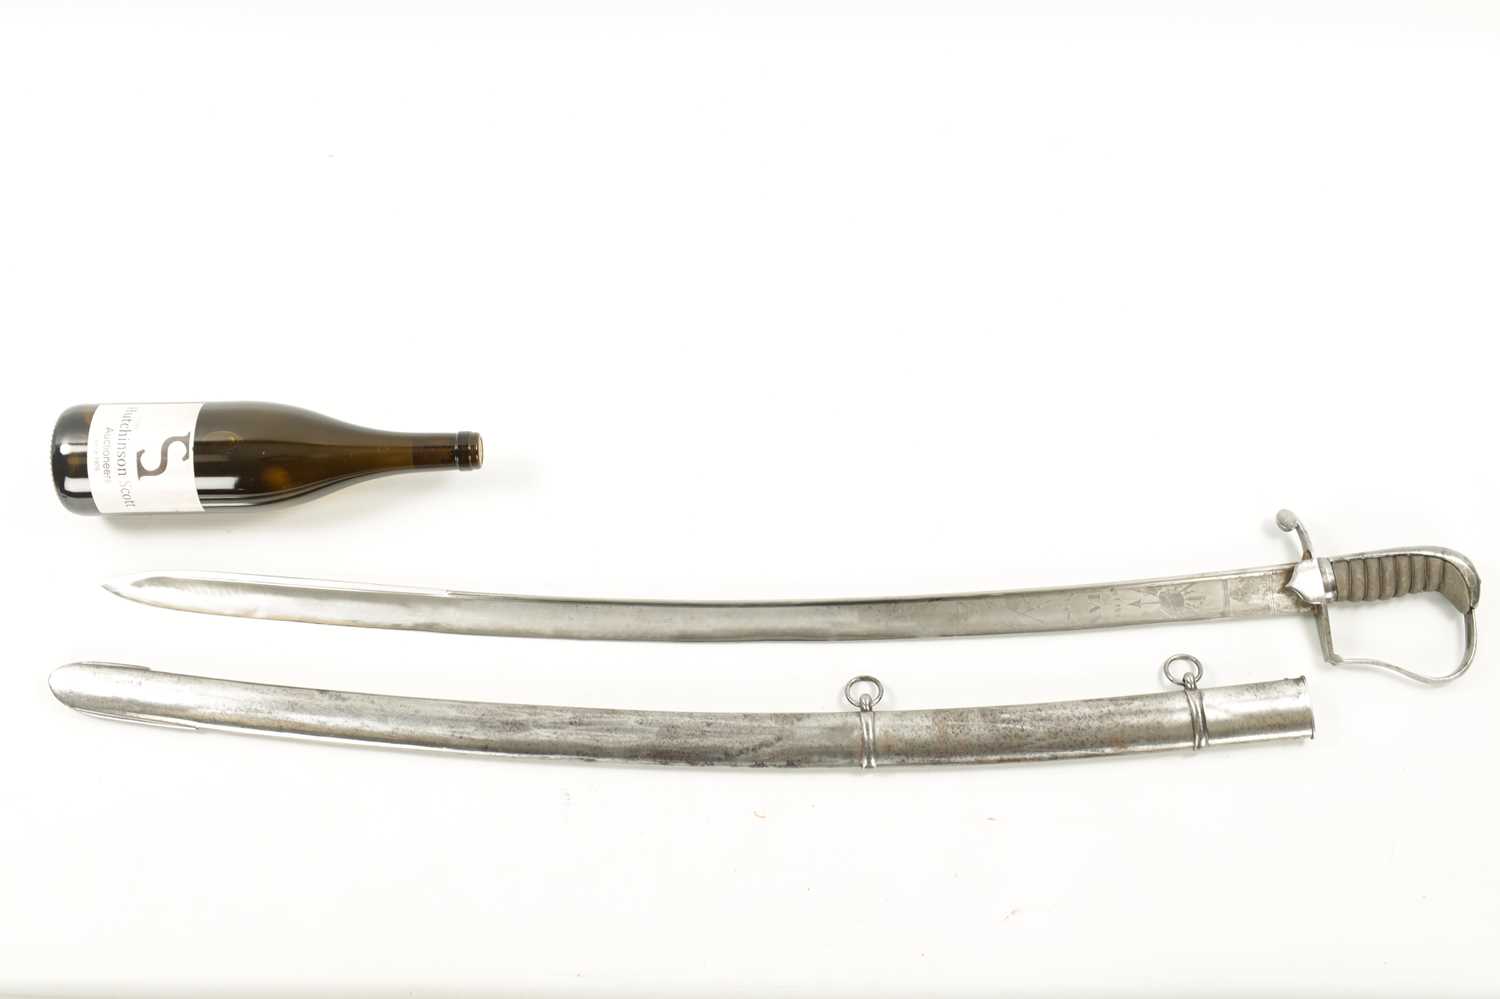 A 1796 QUEENS 16TH LANCERS OFFICER’S SWORD - Image 3 of 6